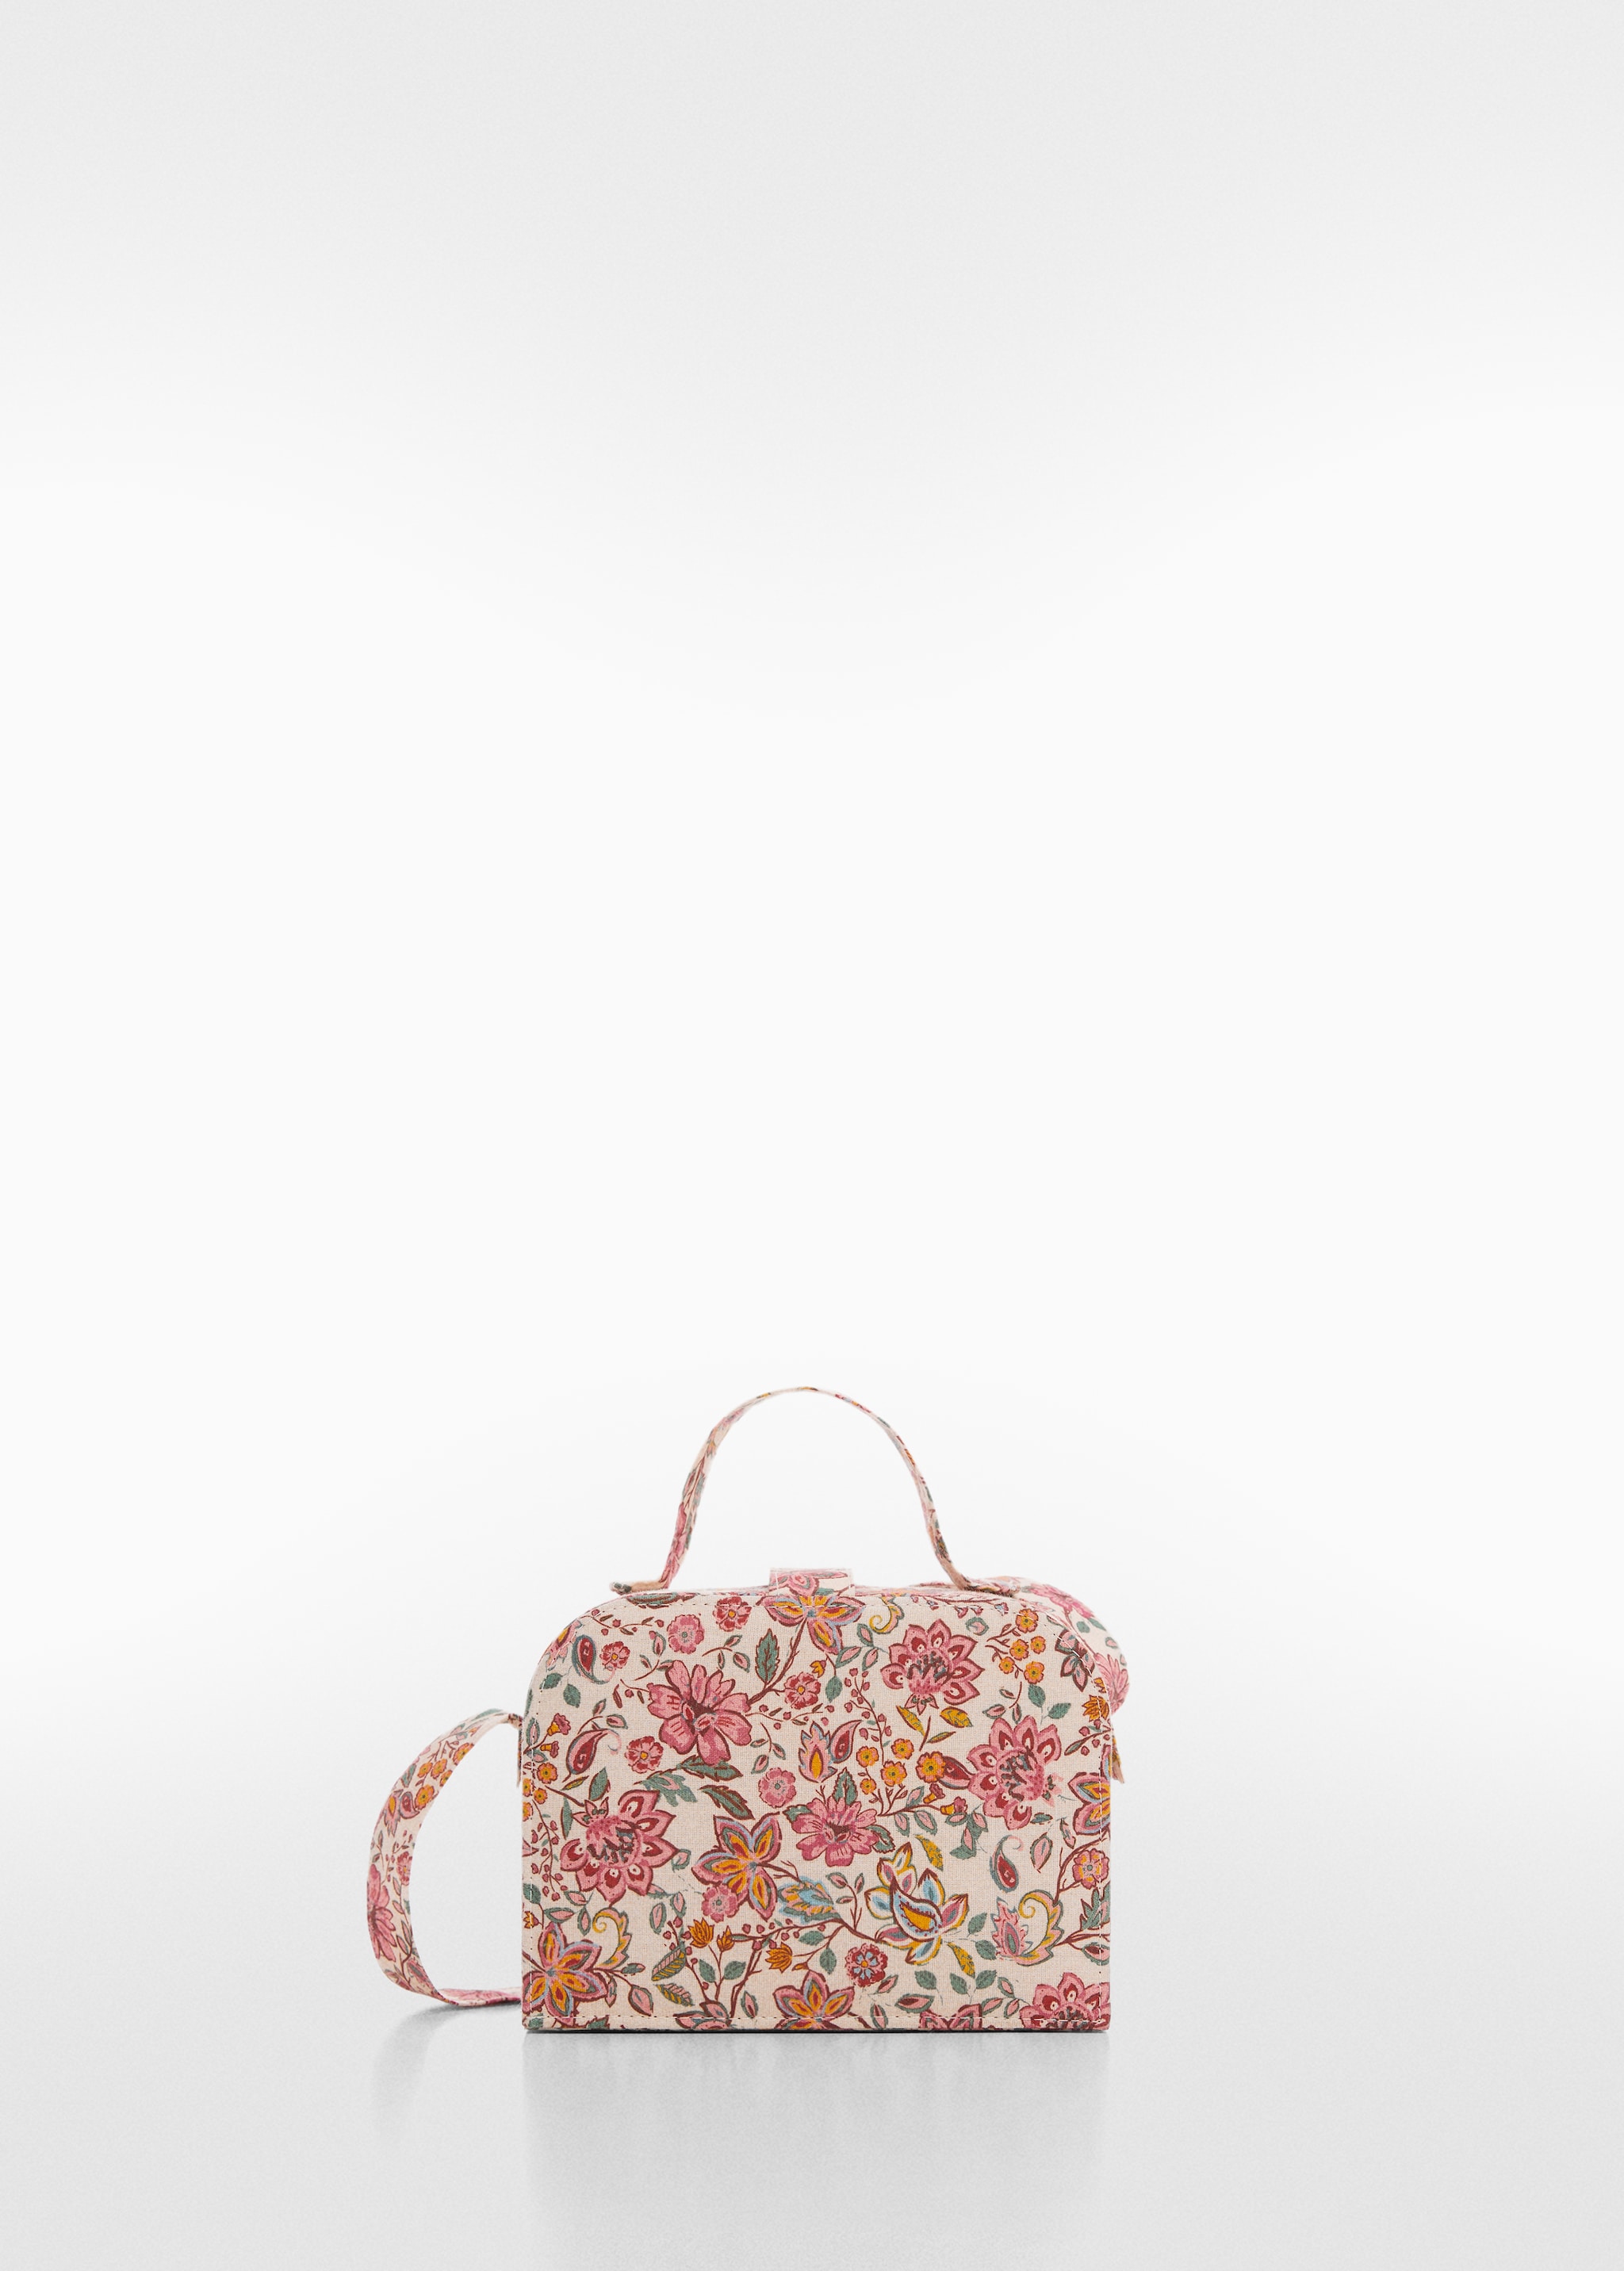 Floral print bag - Article without model